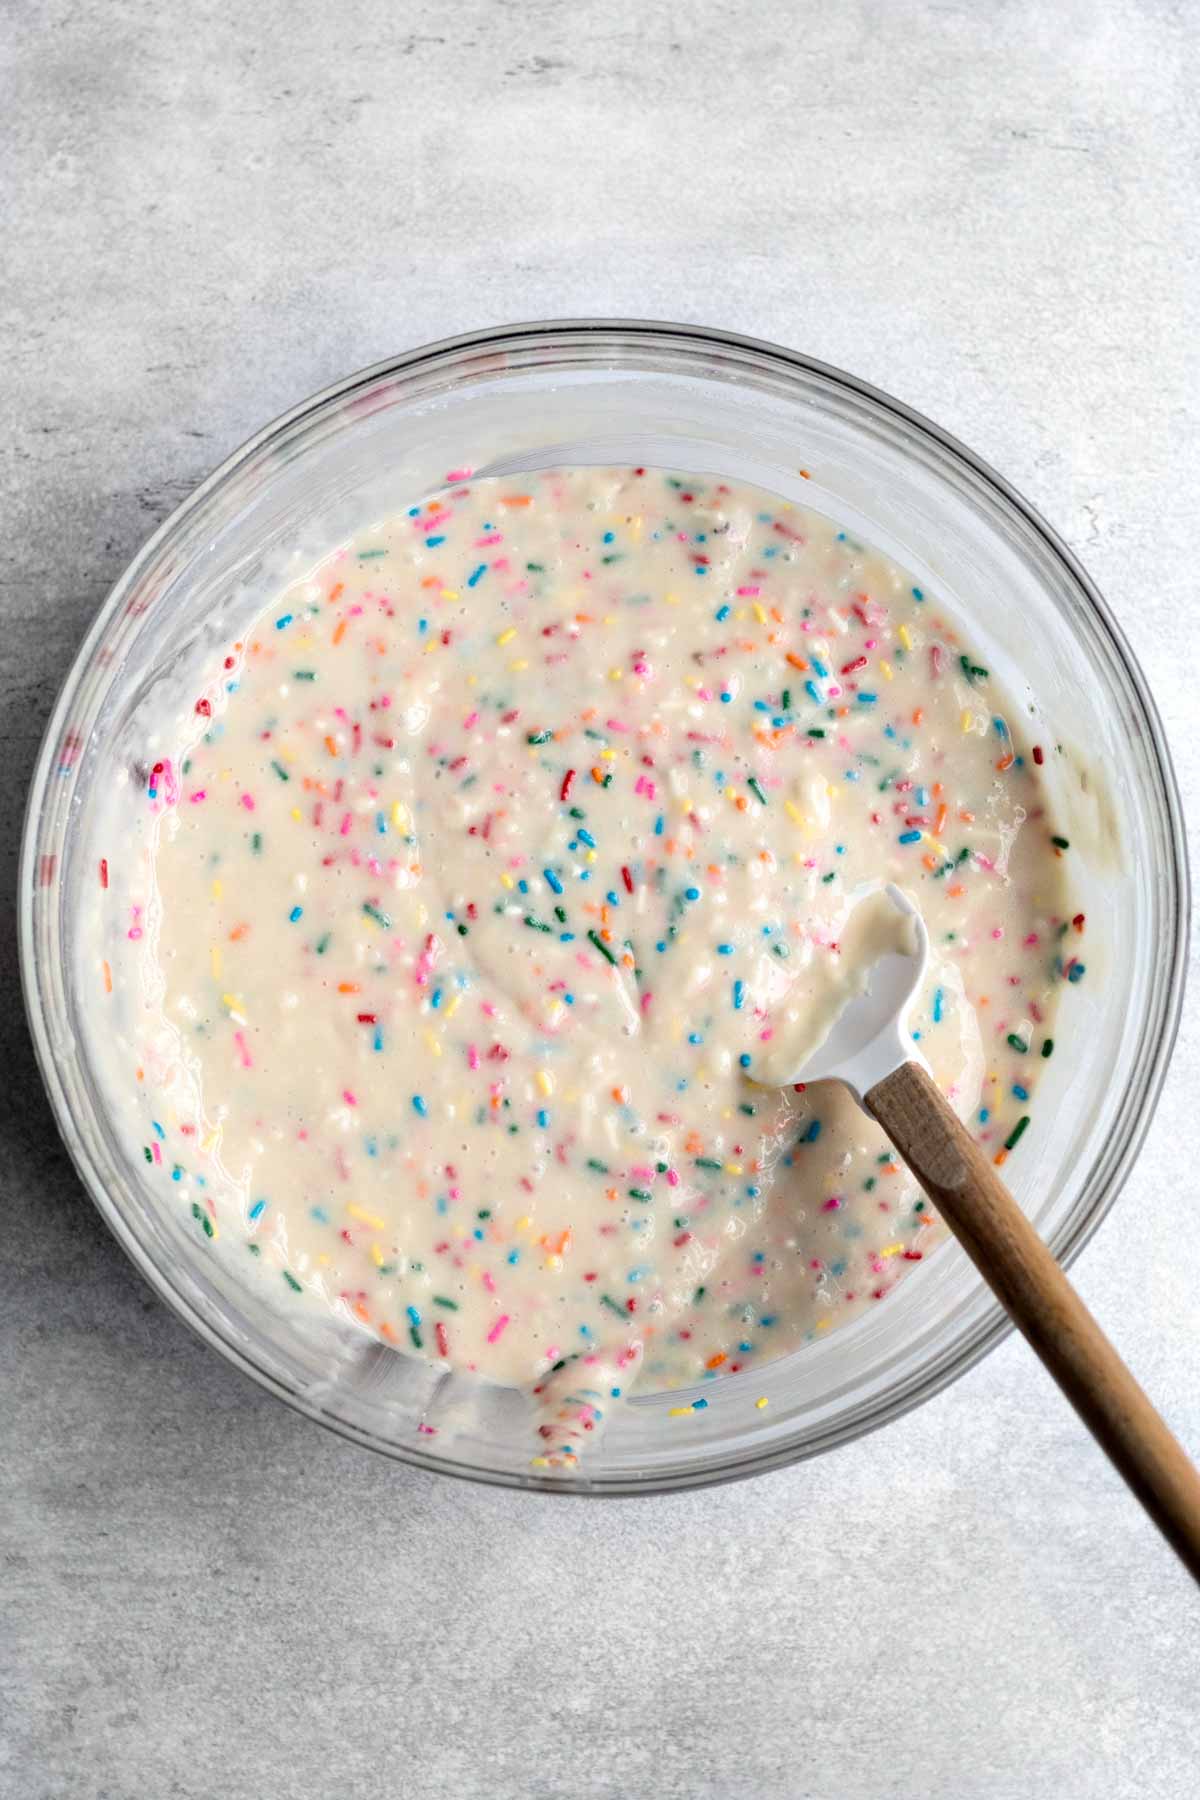 Mixing the sprinkles throughout the batter.